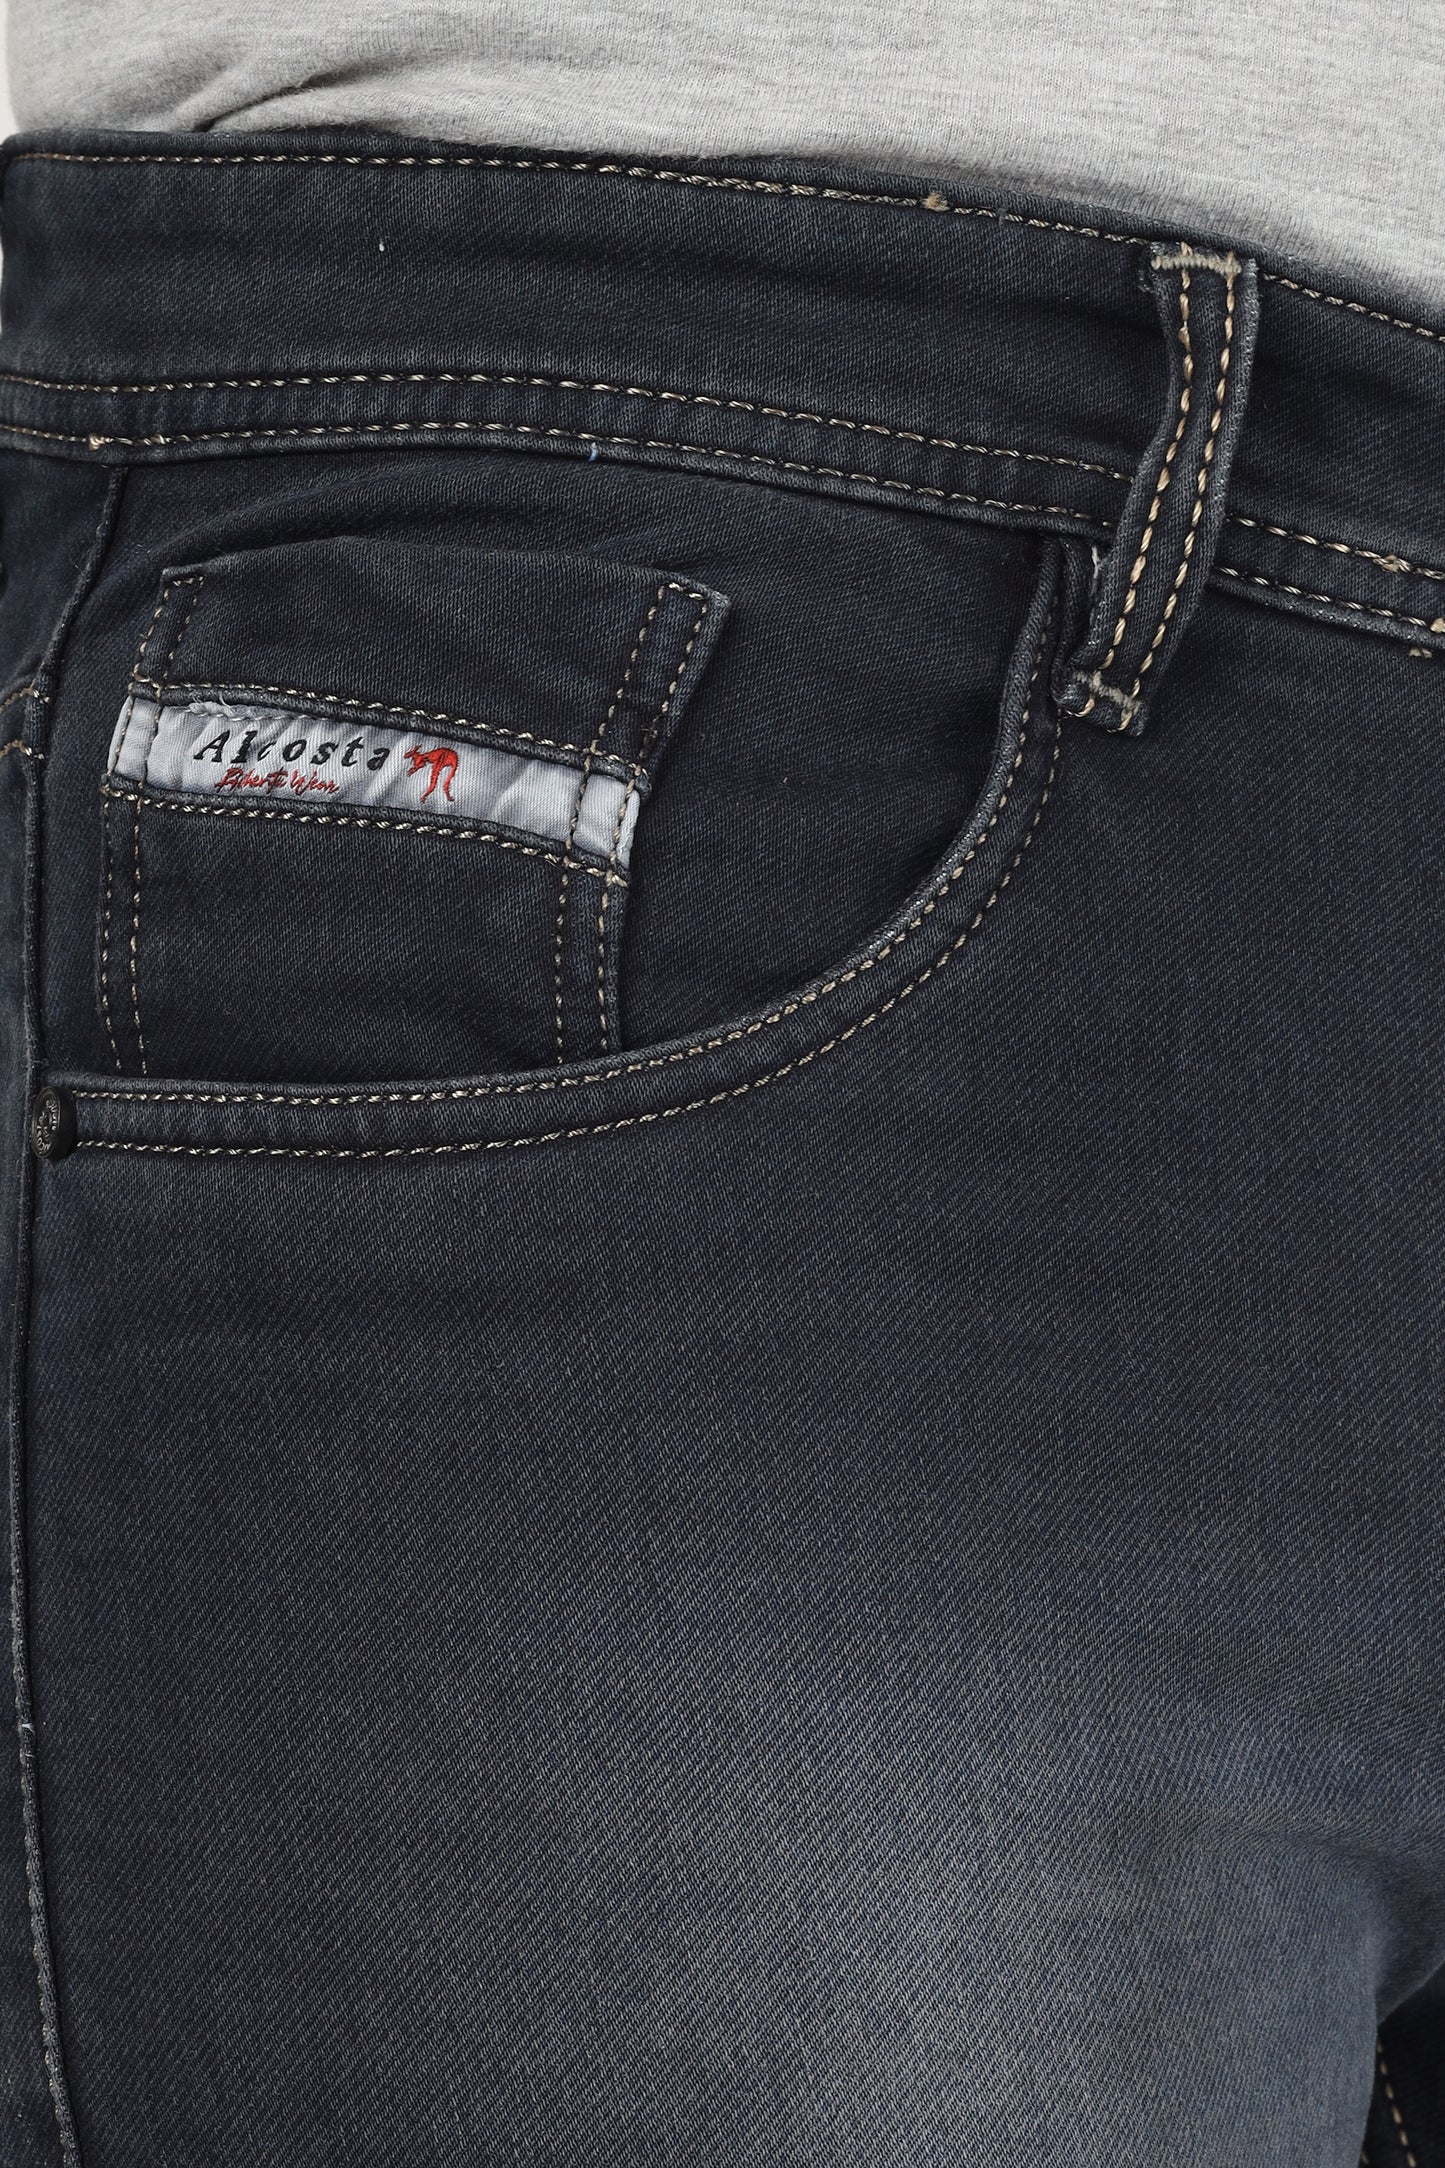 CASUAL POCKET DETAIL TROUSER